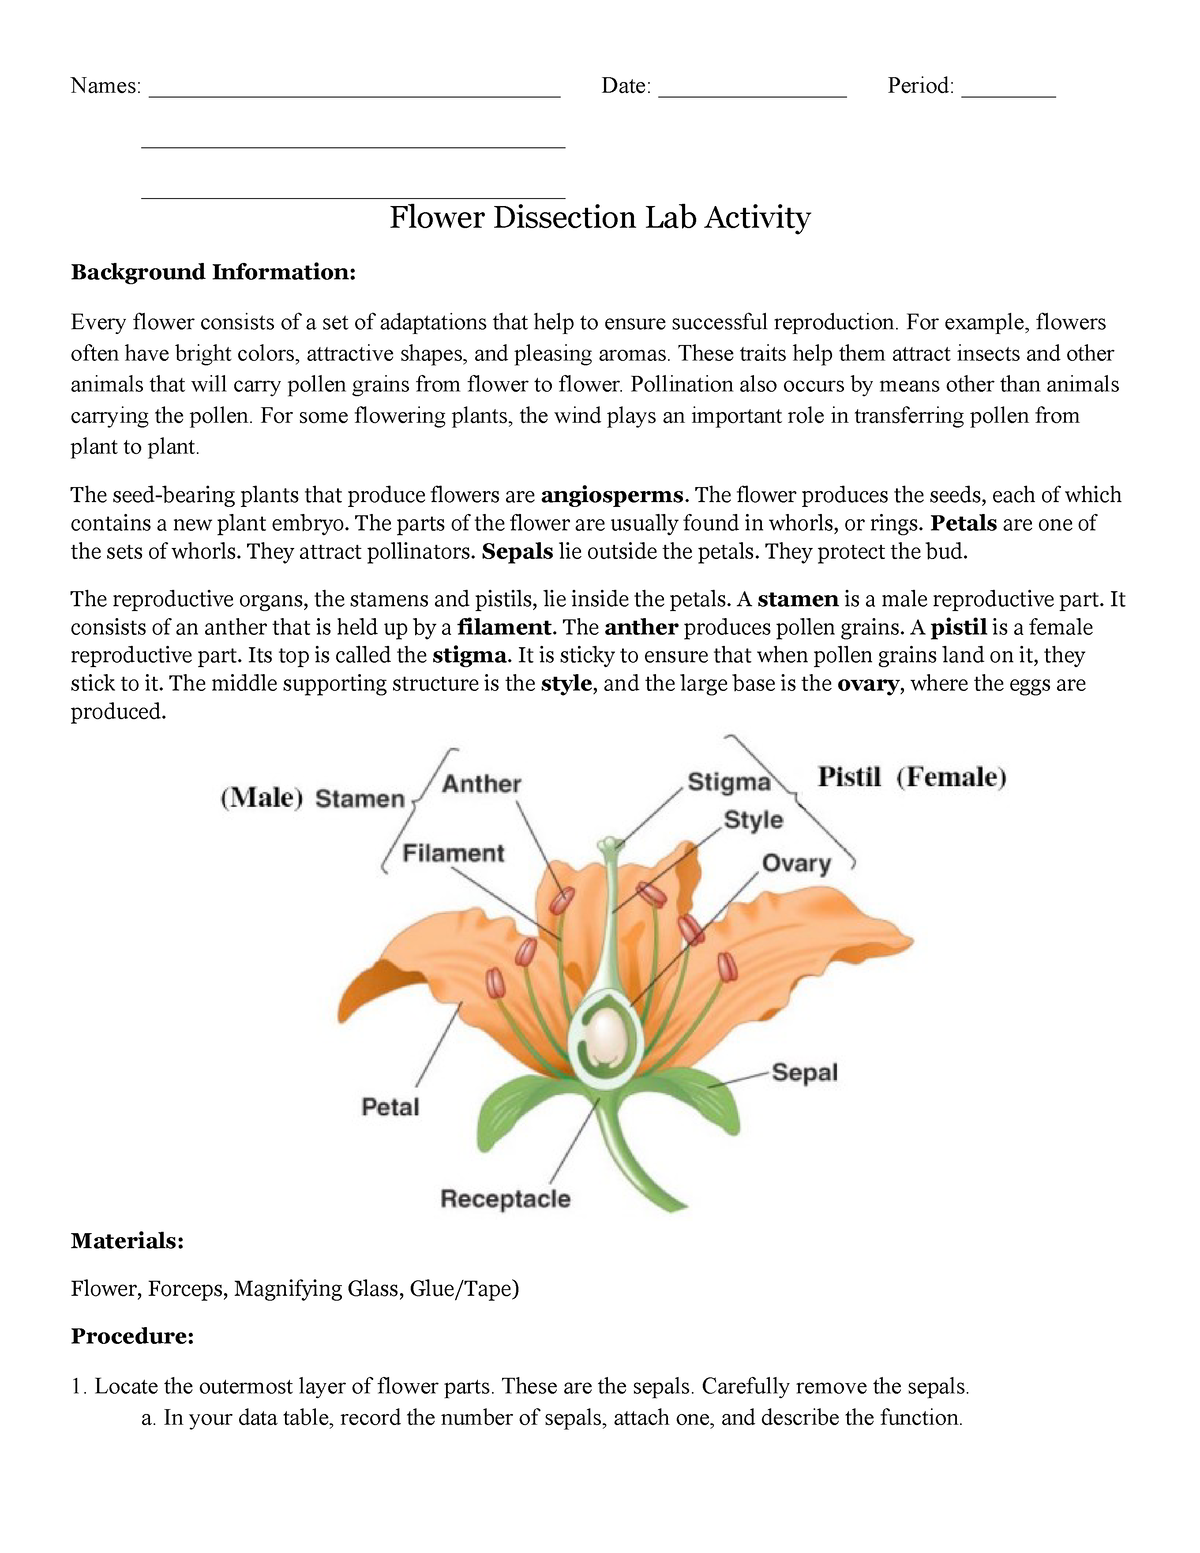 flower-dissection-lab-guide-names